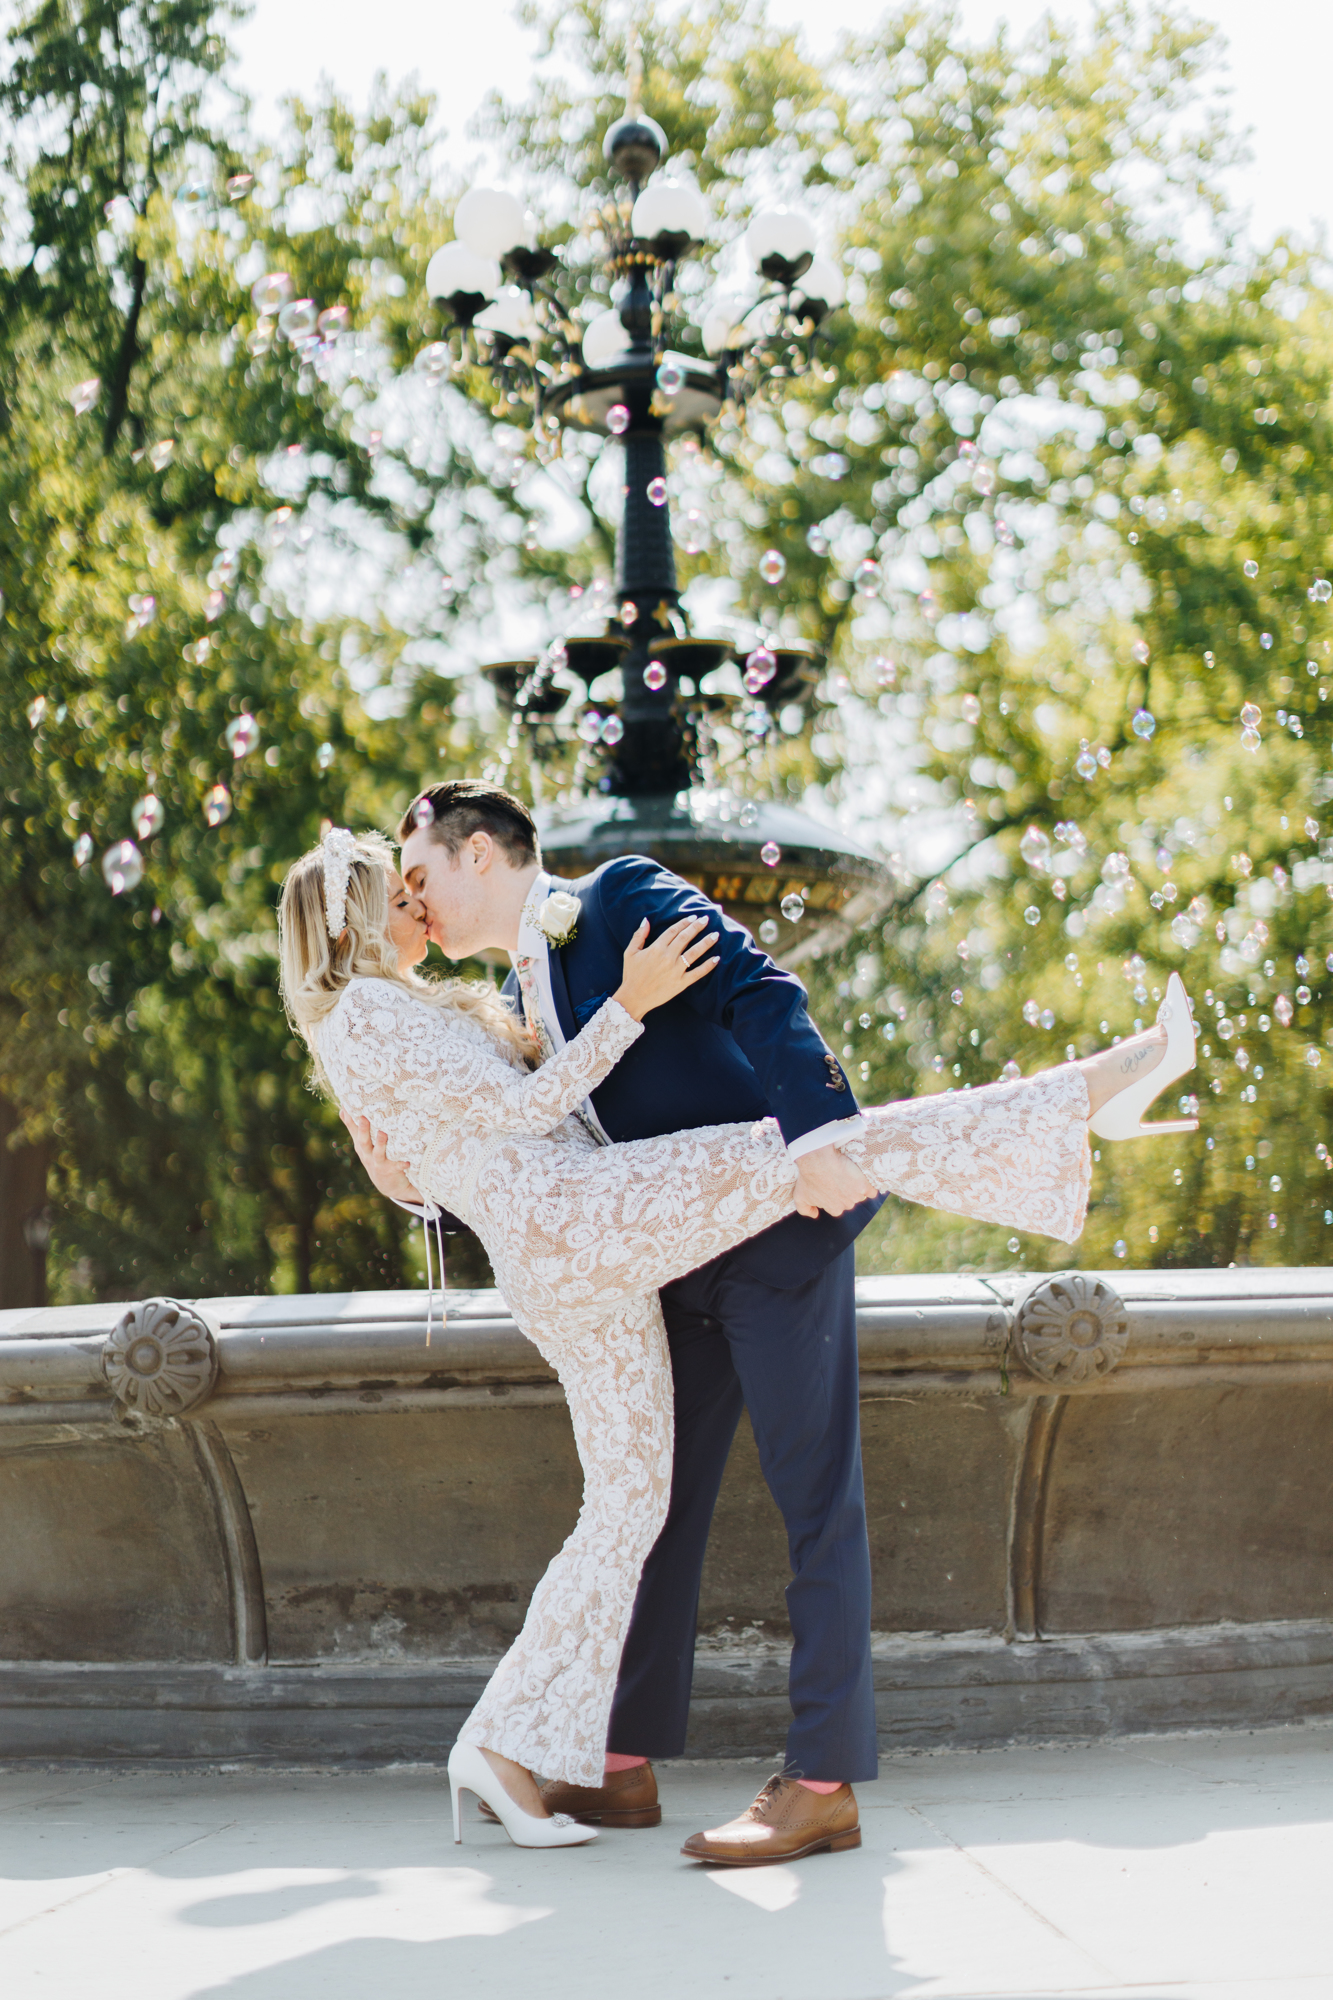 Candid Wagner Cove Elopement in Central Park